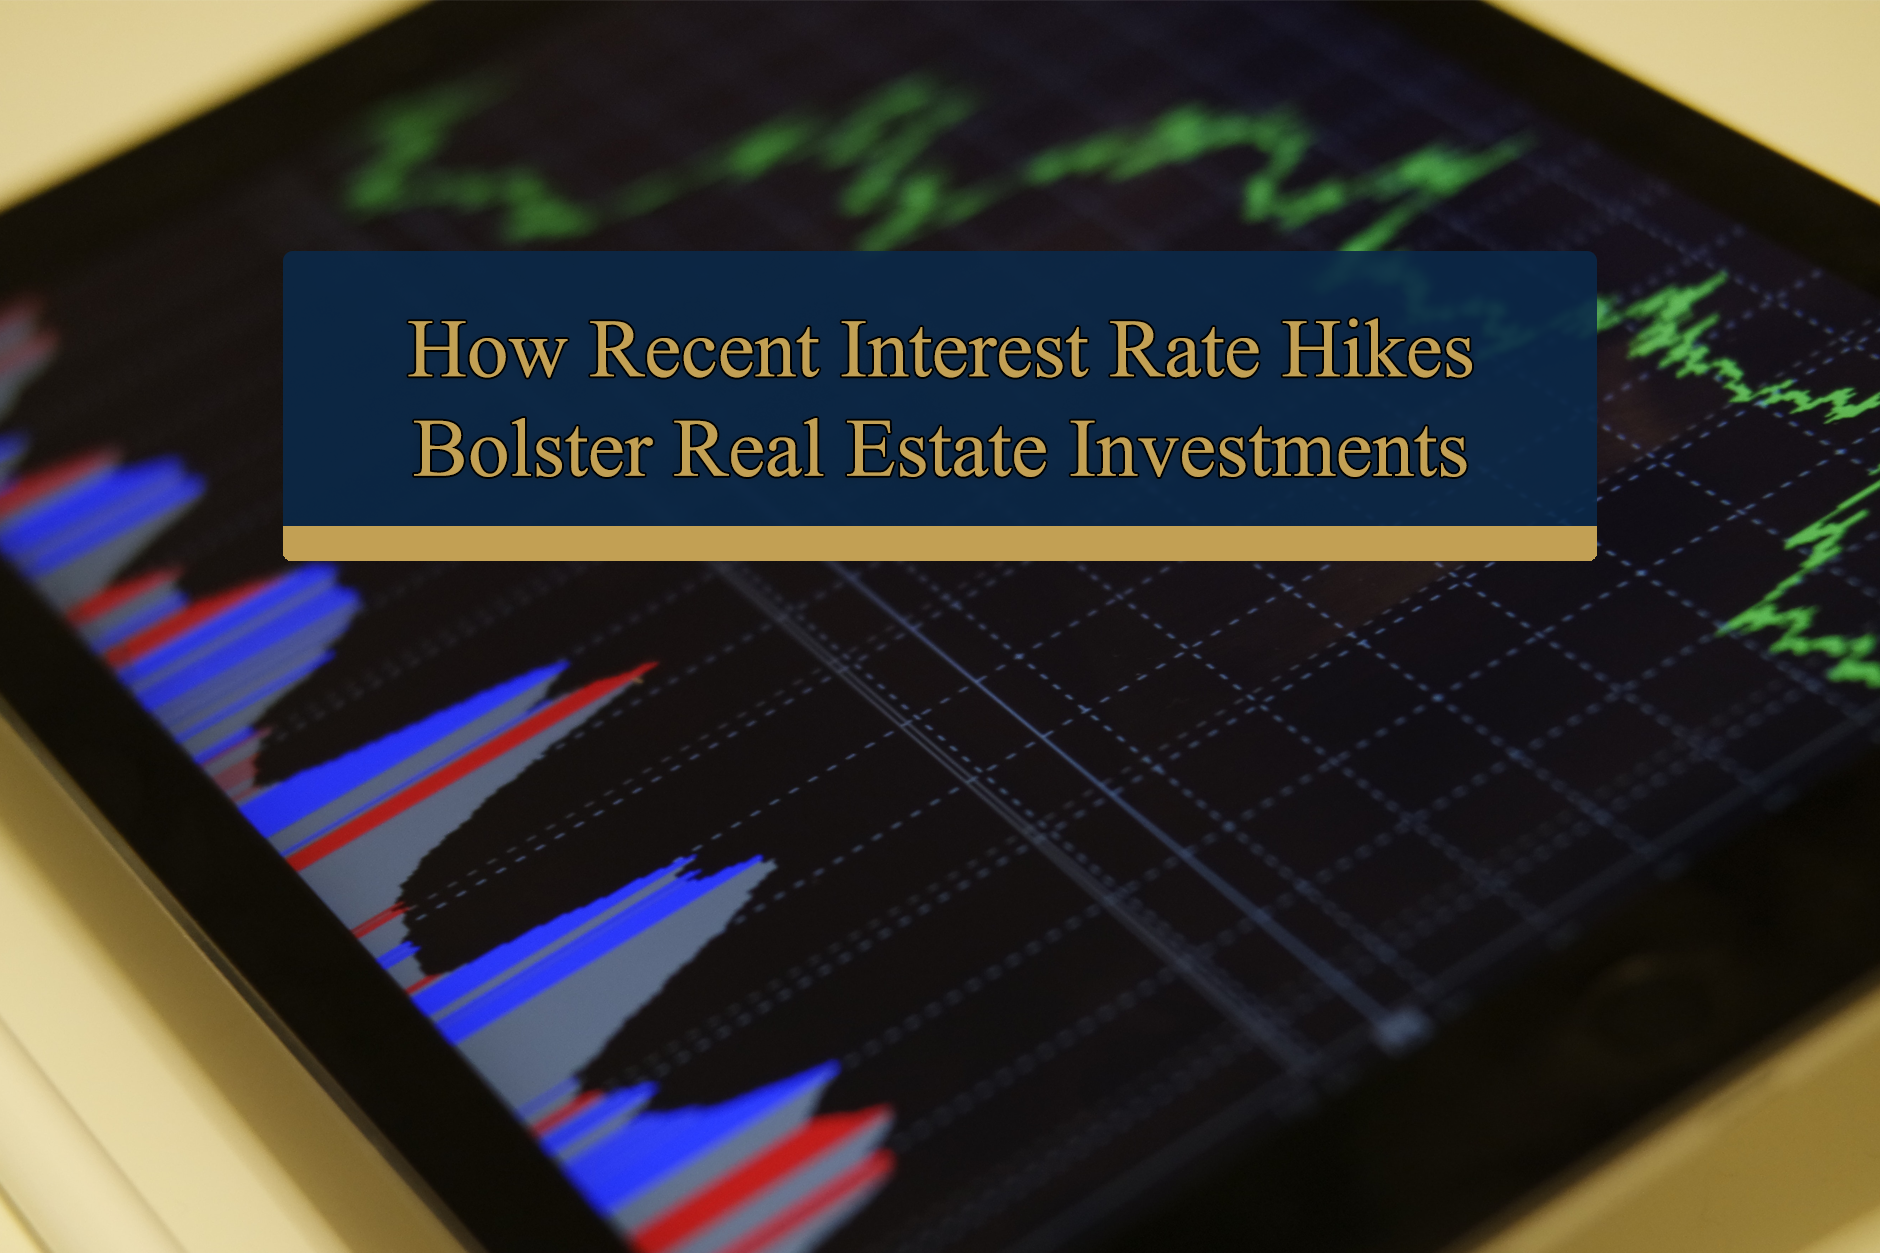 How Recent Interest Rate Hikes Bolster Real Estate Investments